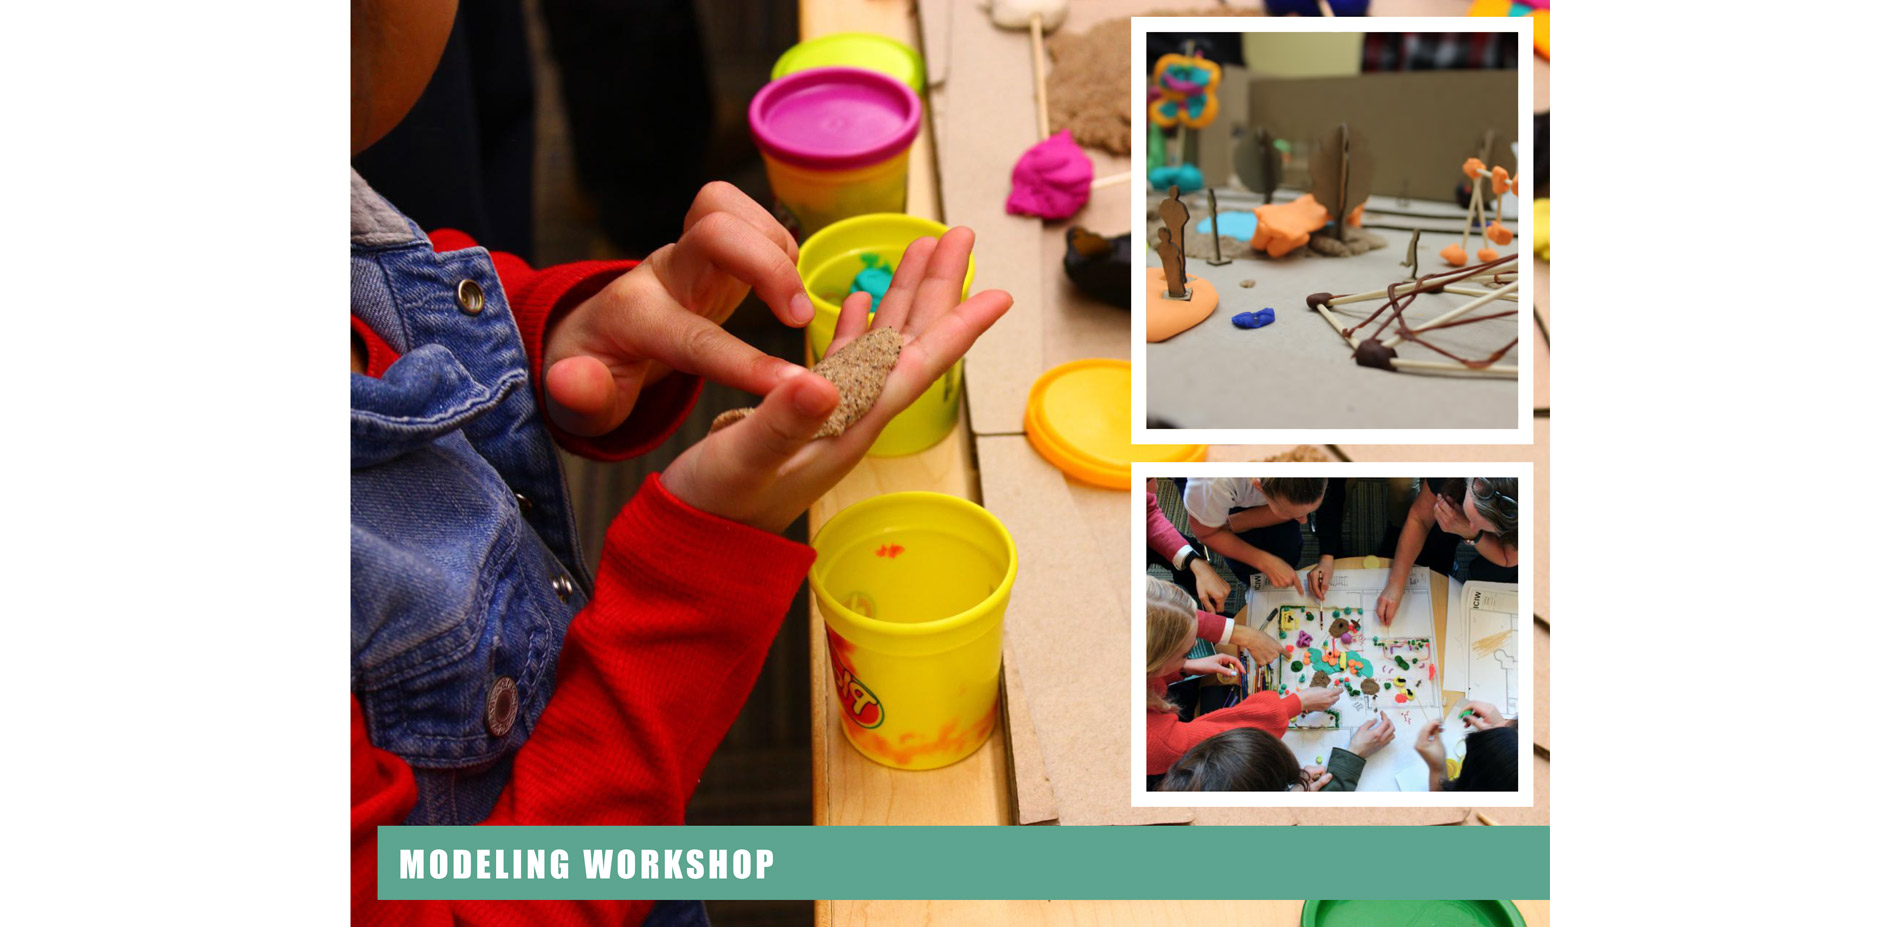 Site modeling was a tangible way for the women and their children to design spatially. We built a cardboard model and provided clay, kinetic sand and …